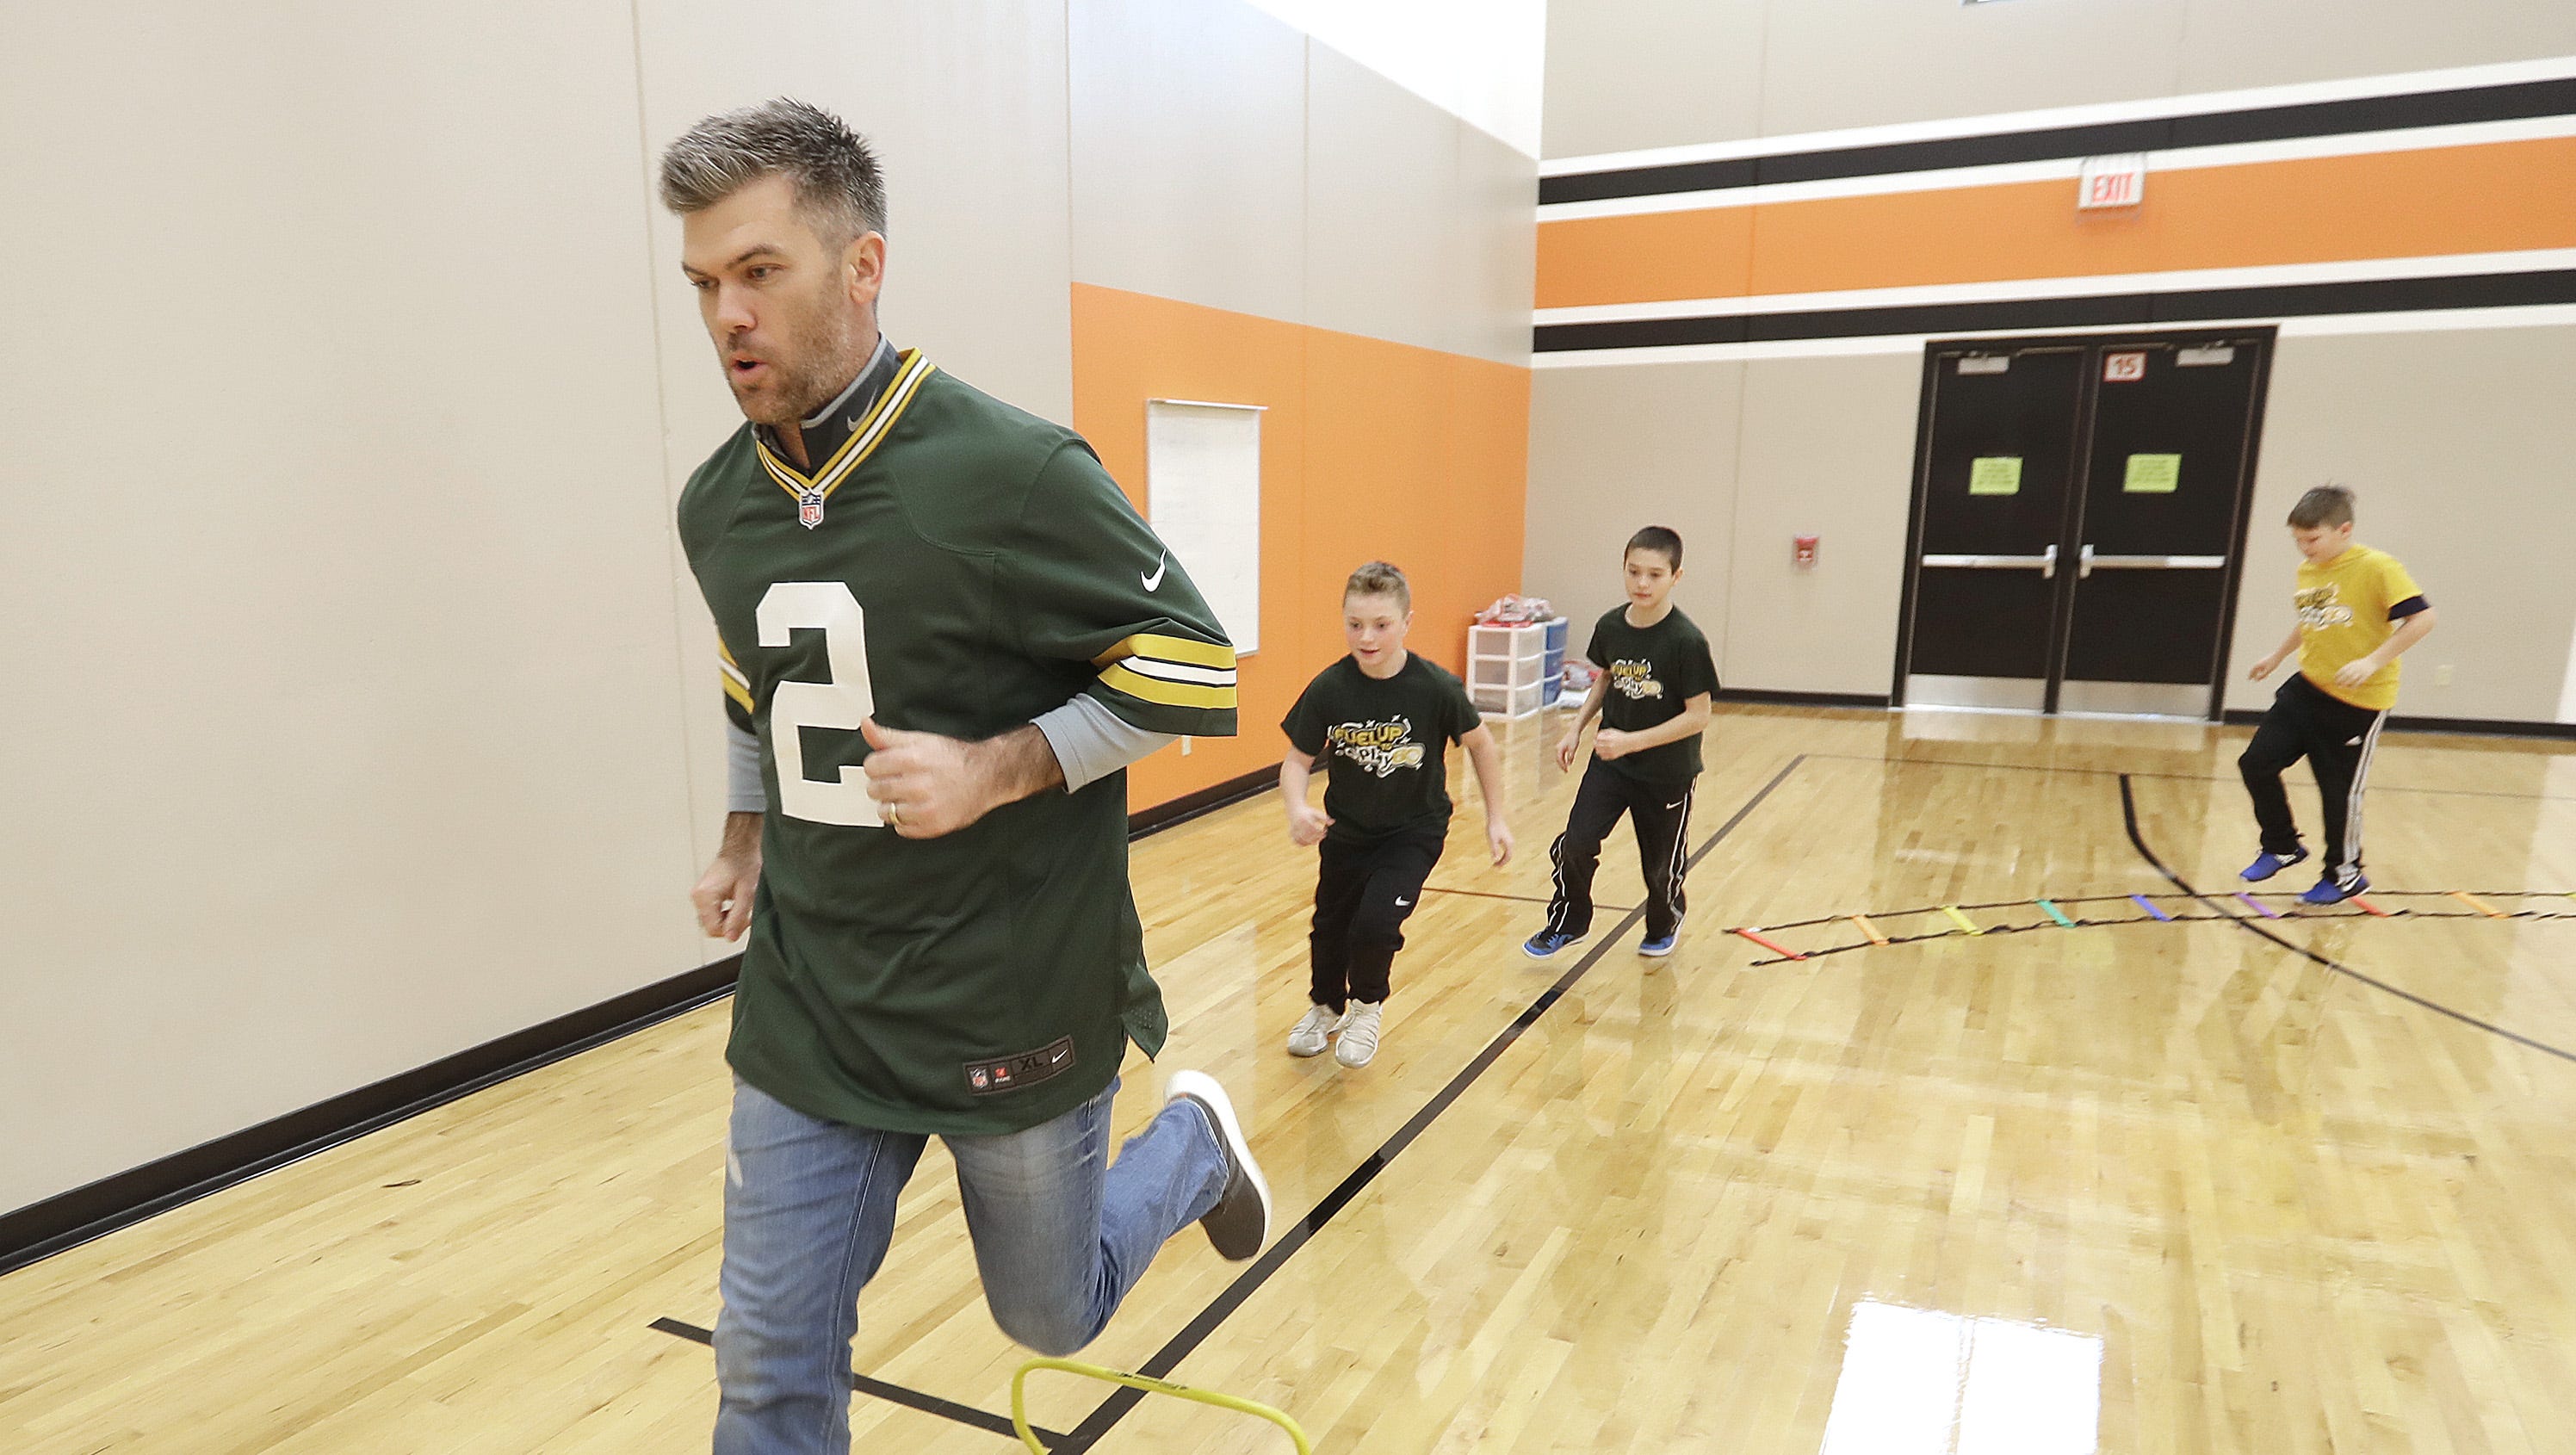 Green Bay Packers kicker Mason Crosby works out with student leaders on Jan. 30, 2018, at Hemlock Creek Elementary School in the town of Lawrence. The visit was a reward for their involvement in Fuel Up to Play 60, an in-school activity and wellness program provided by the Wisconsin Milk Marketing Board and the Green Bay Packers.